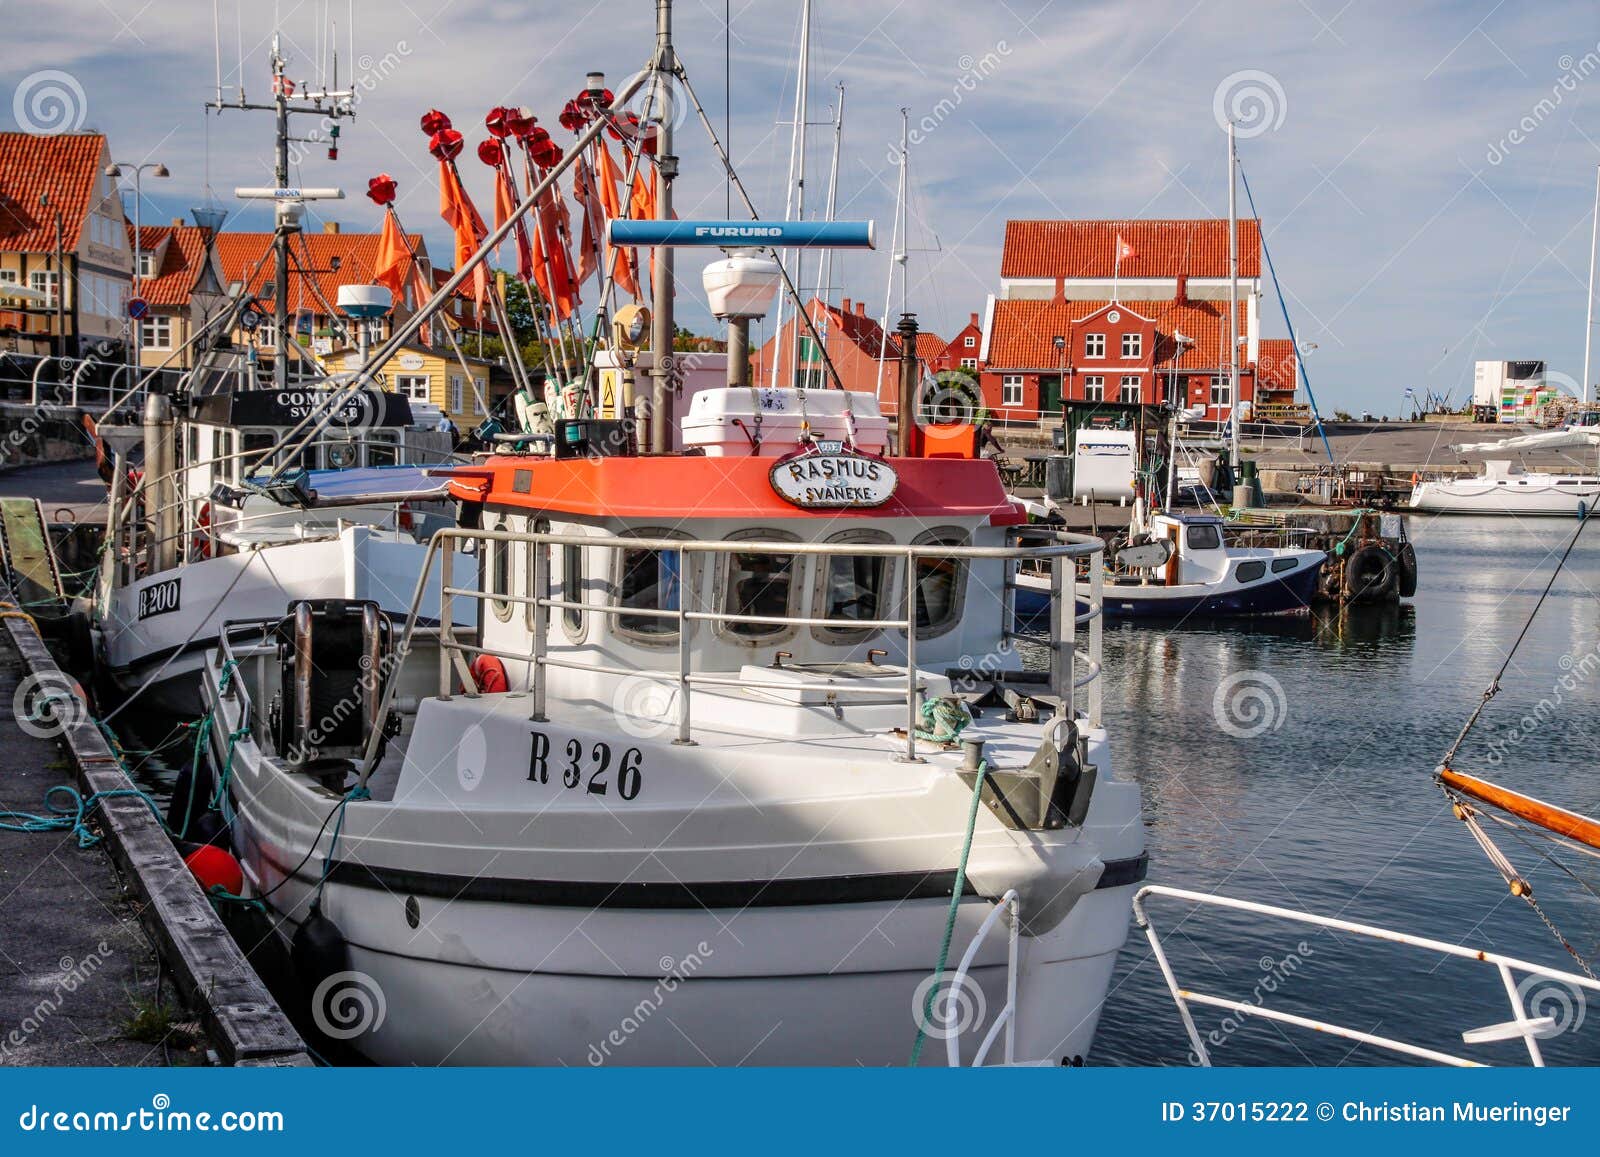 Fishing boats in the harbor Editorial Photography